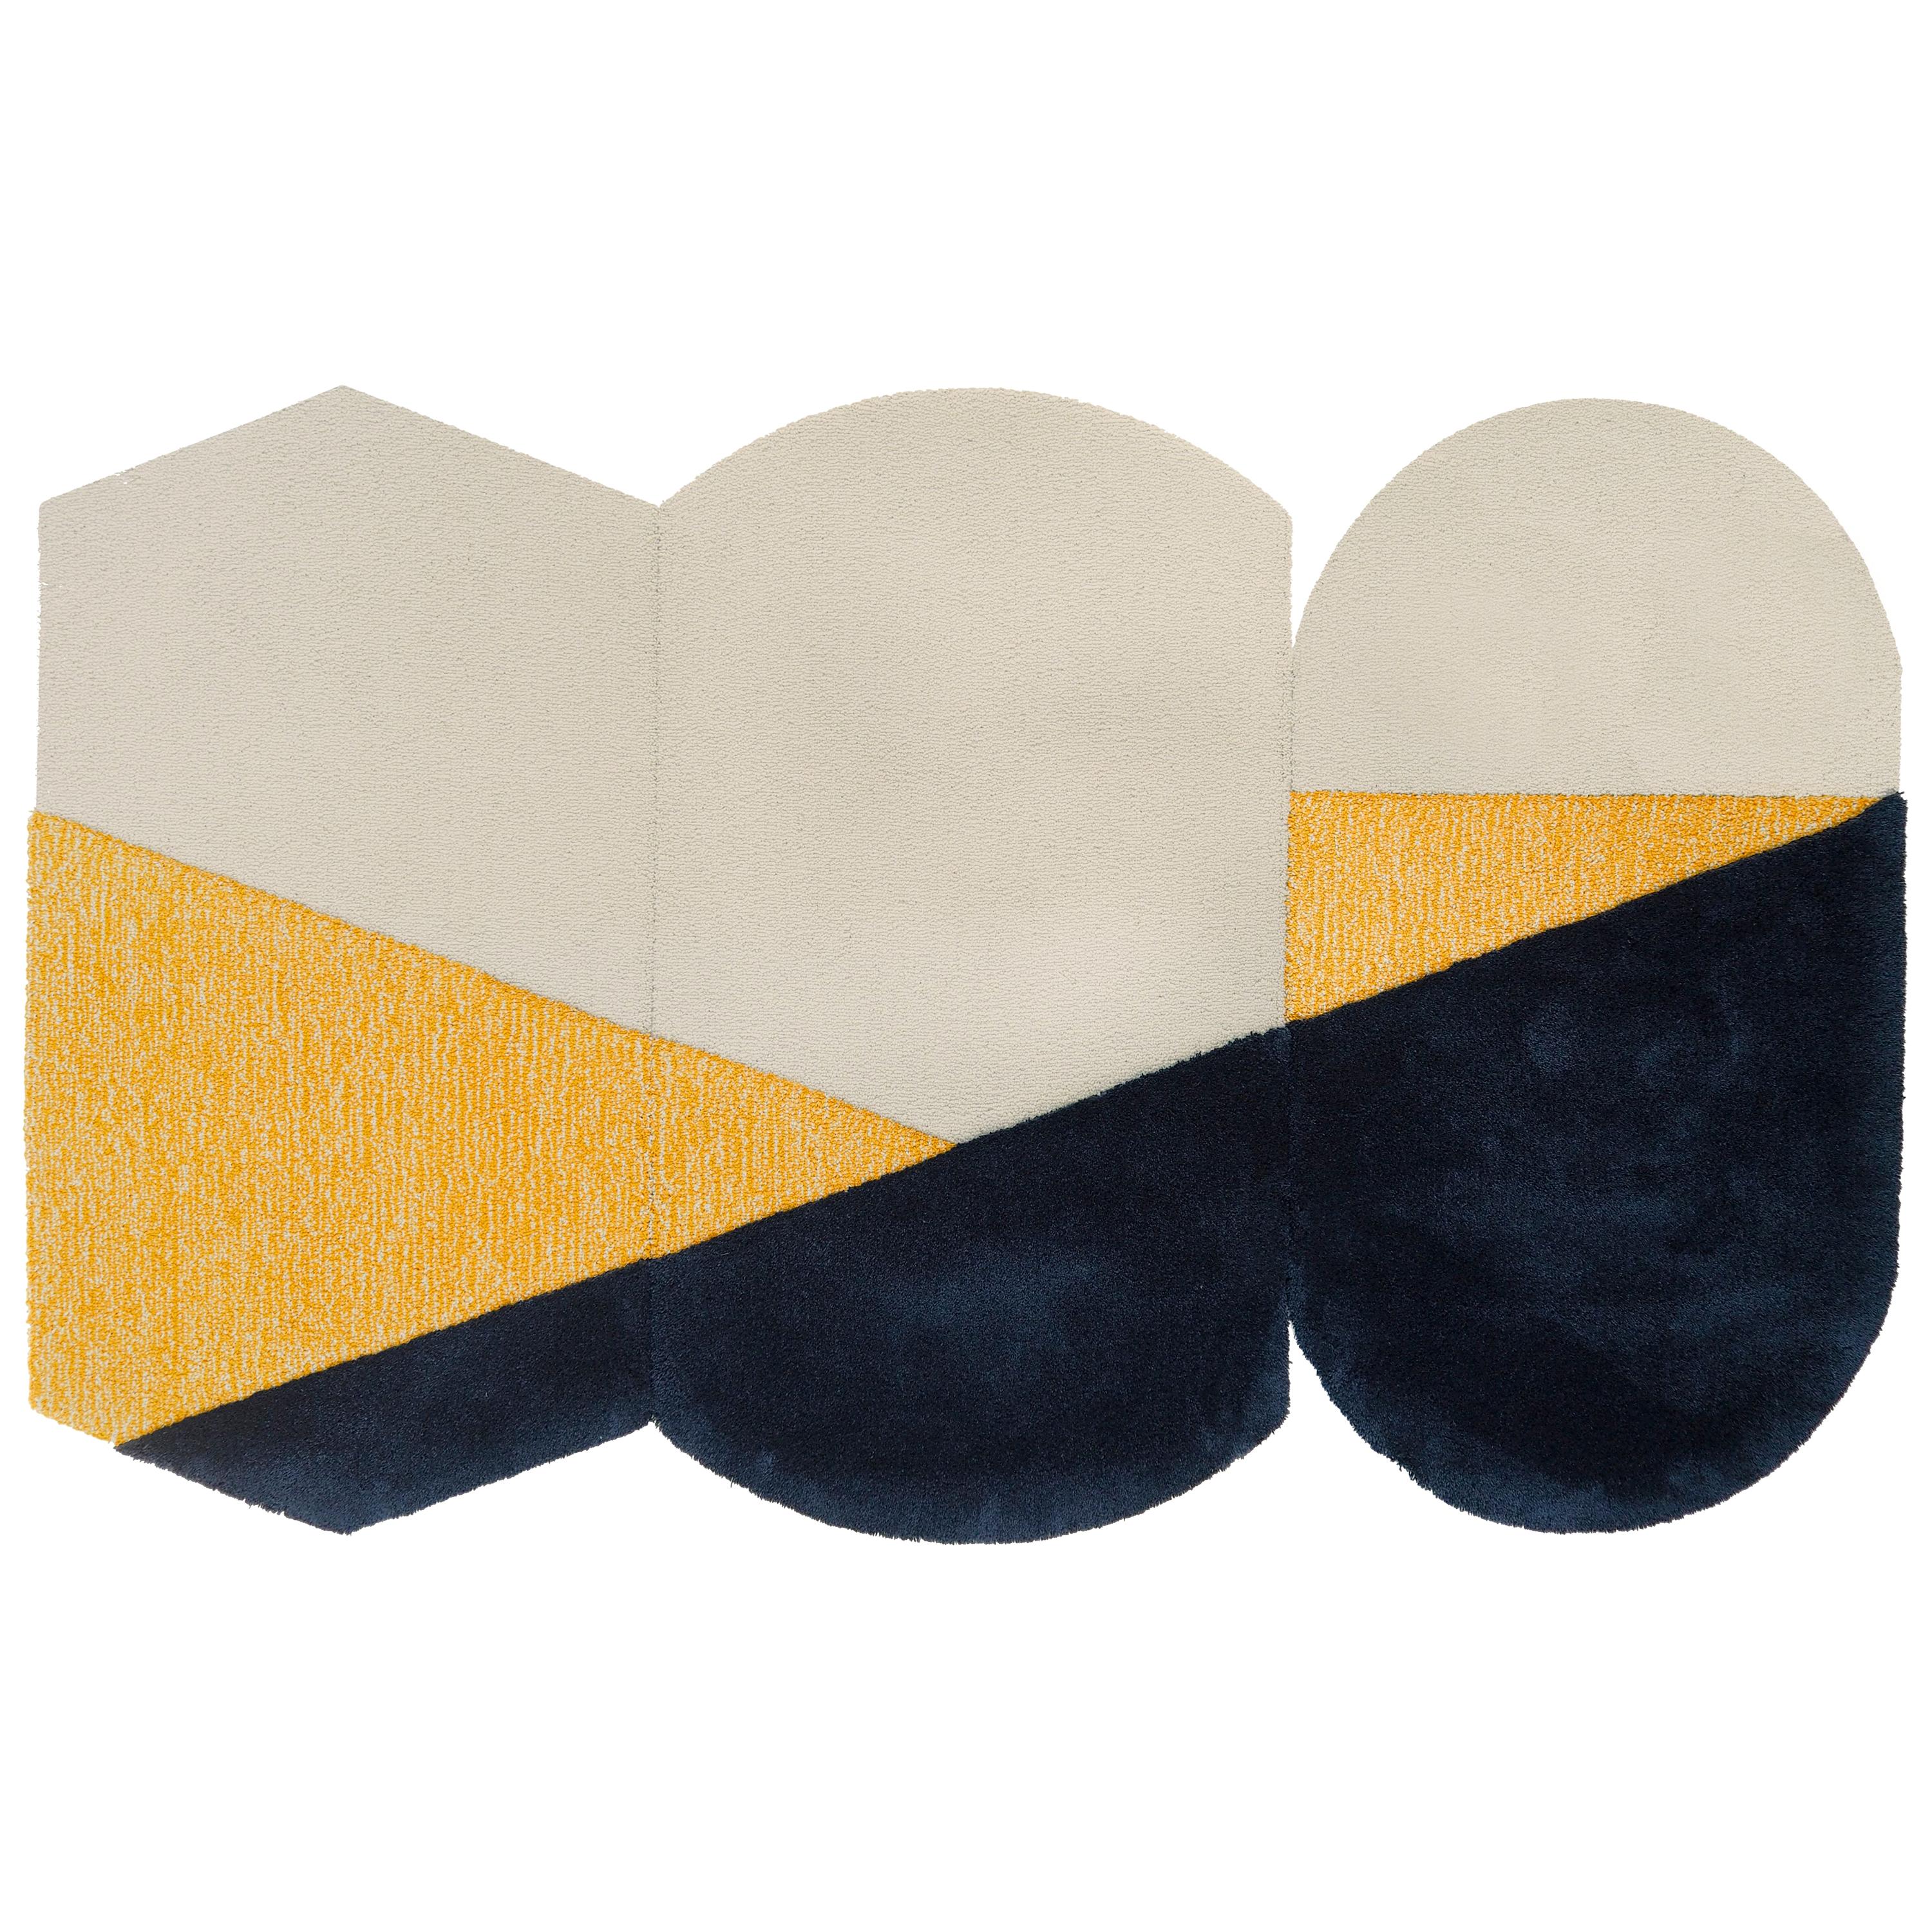 Oci Triptych S, Composition of 3 Rugs 100% Wool /Yellow and Deep Gray by Portego